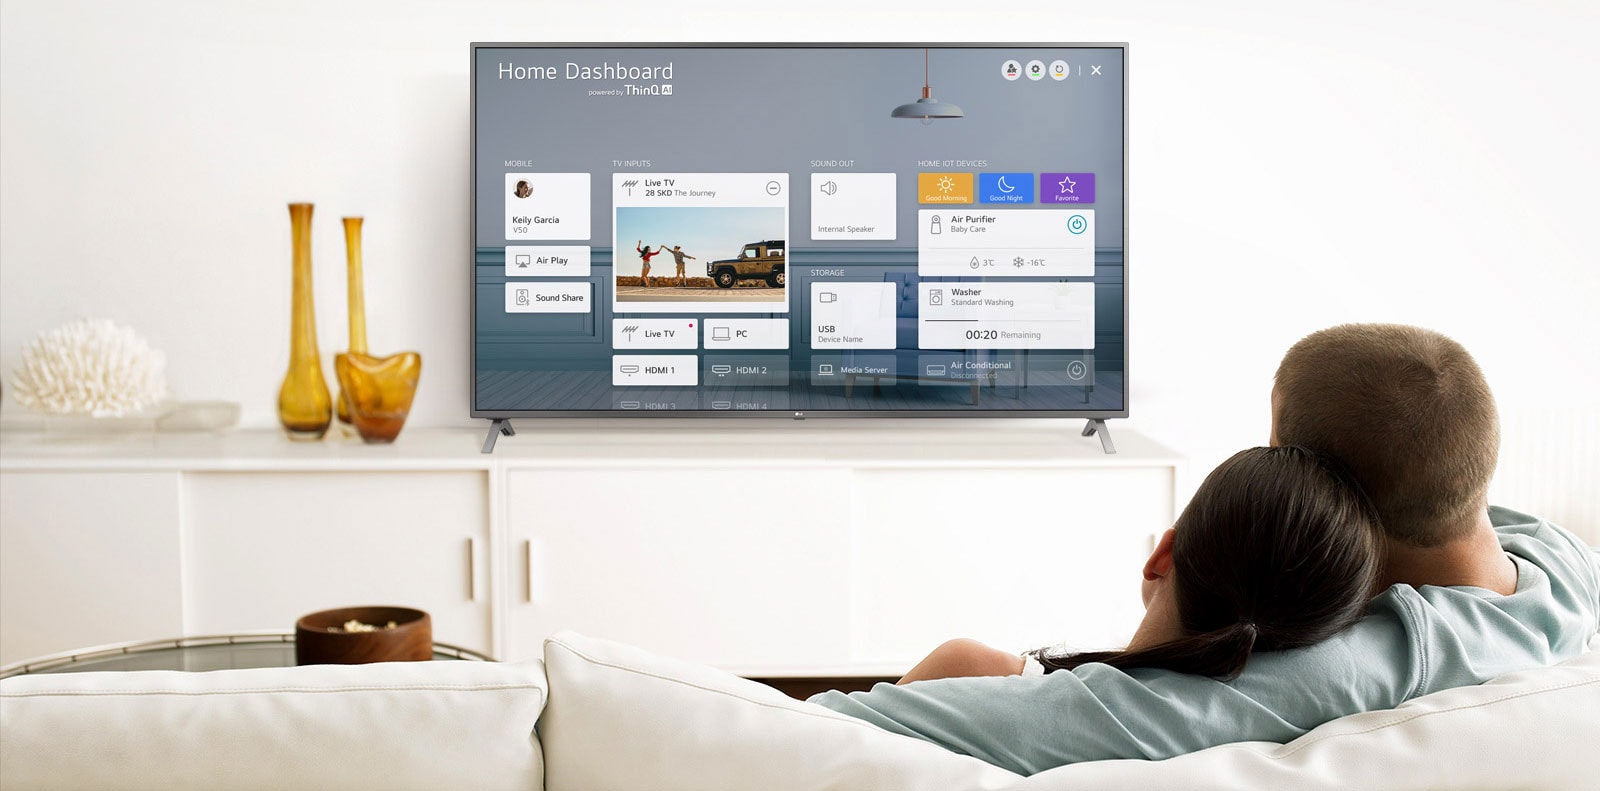 A men and women sitting on a sofa in the living room with the Home Dashboard on the TV screen.